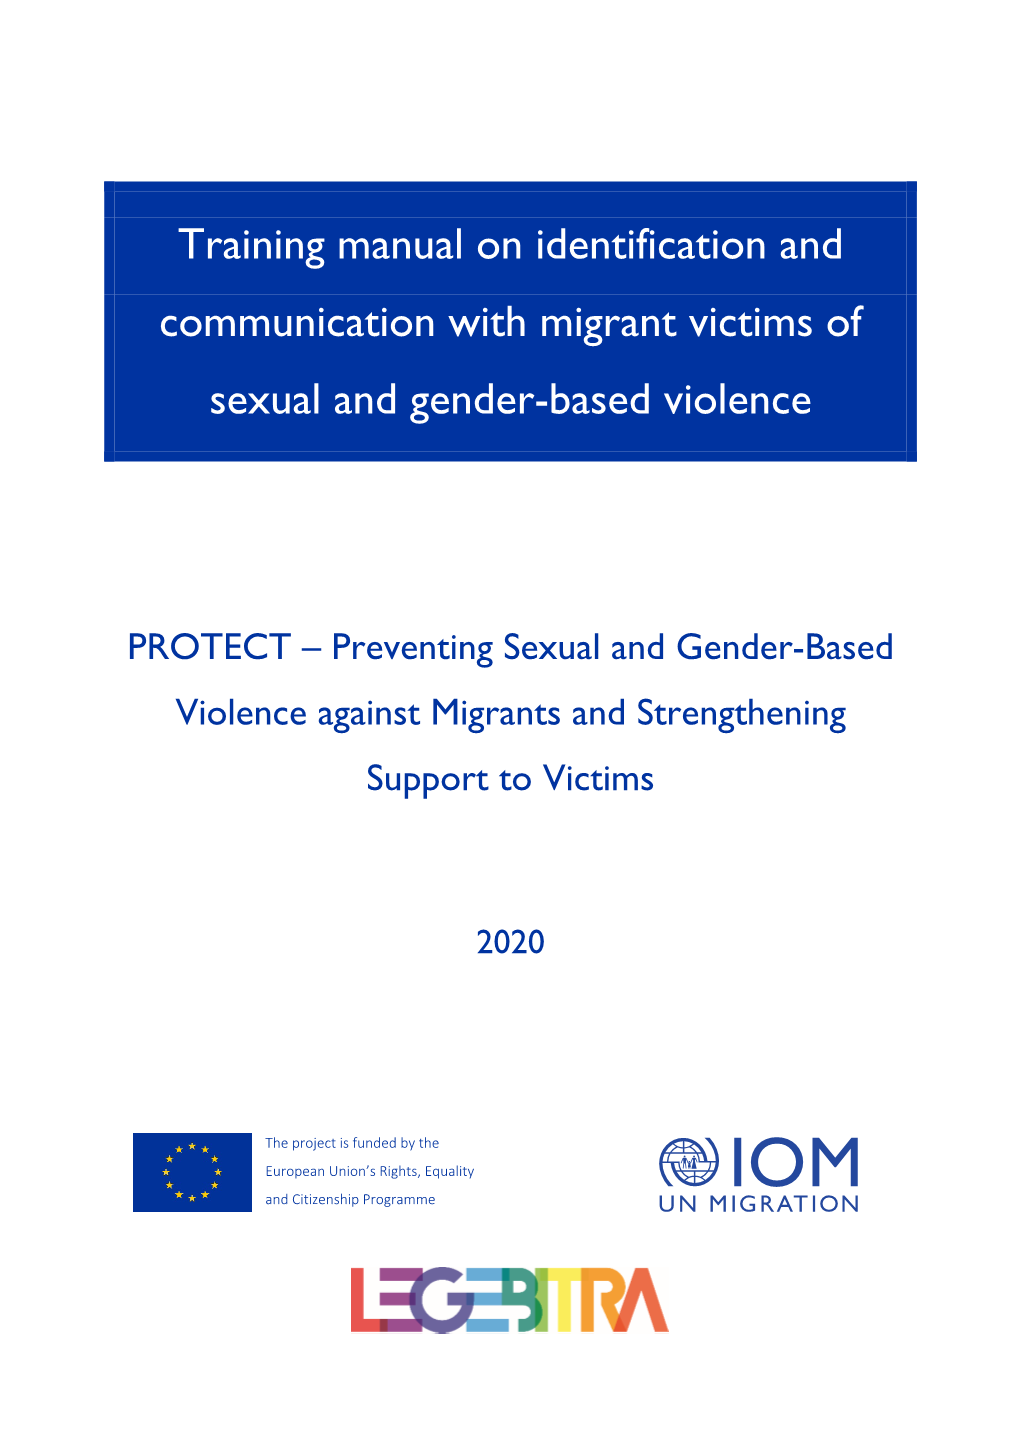 Training Manual on Identification and Communication with Migrant Victims of Sexual and Gender-Based Violence